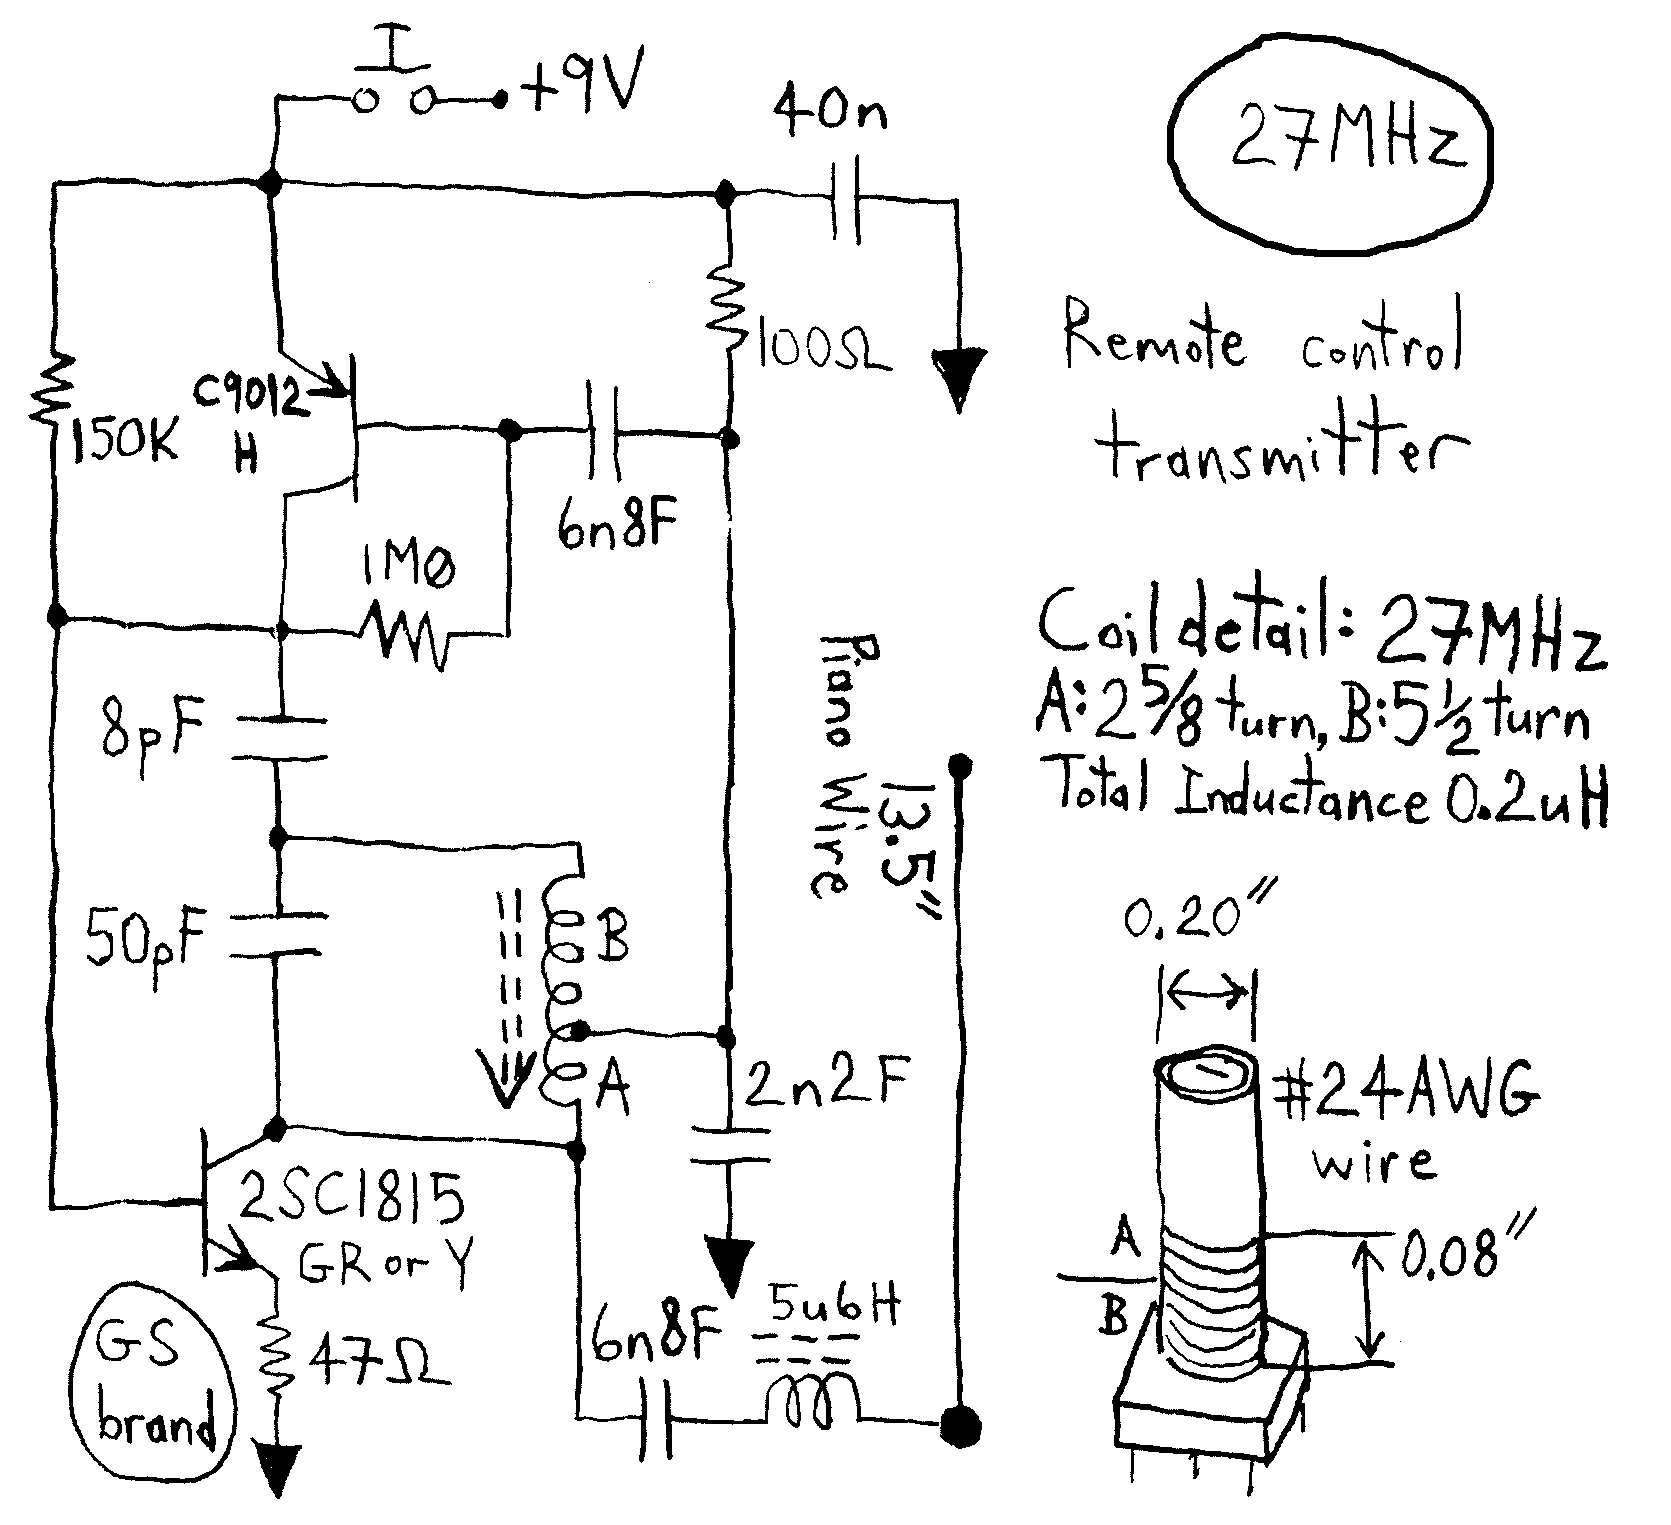 Simple RC Cars - Single channel Transmitters and Super Regenerative  Receivers at 27 MHz and 49 MHz